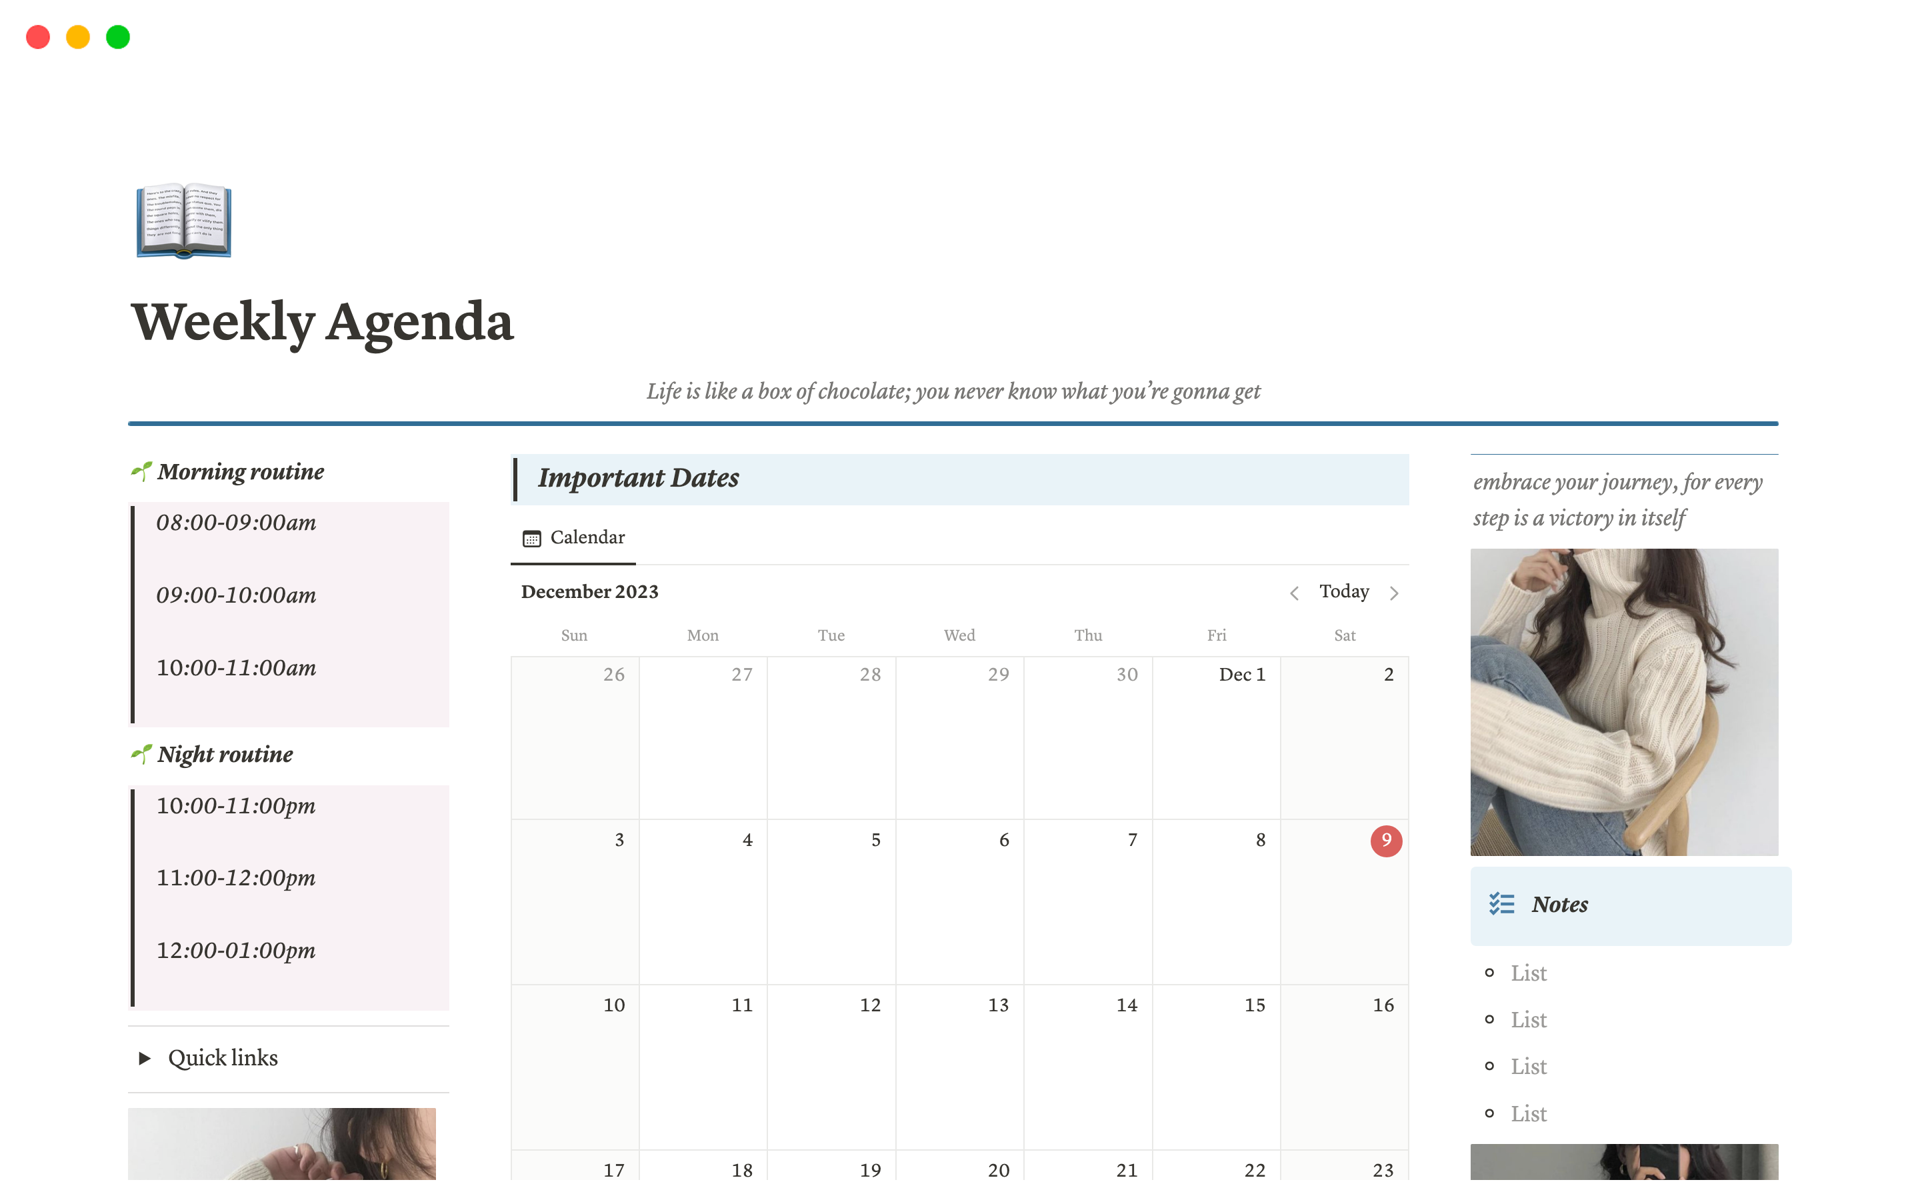 Weekly agenda for organization and management notion template.